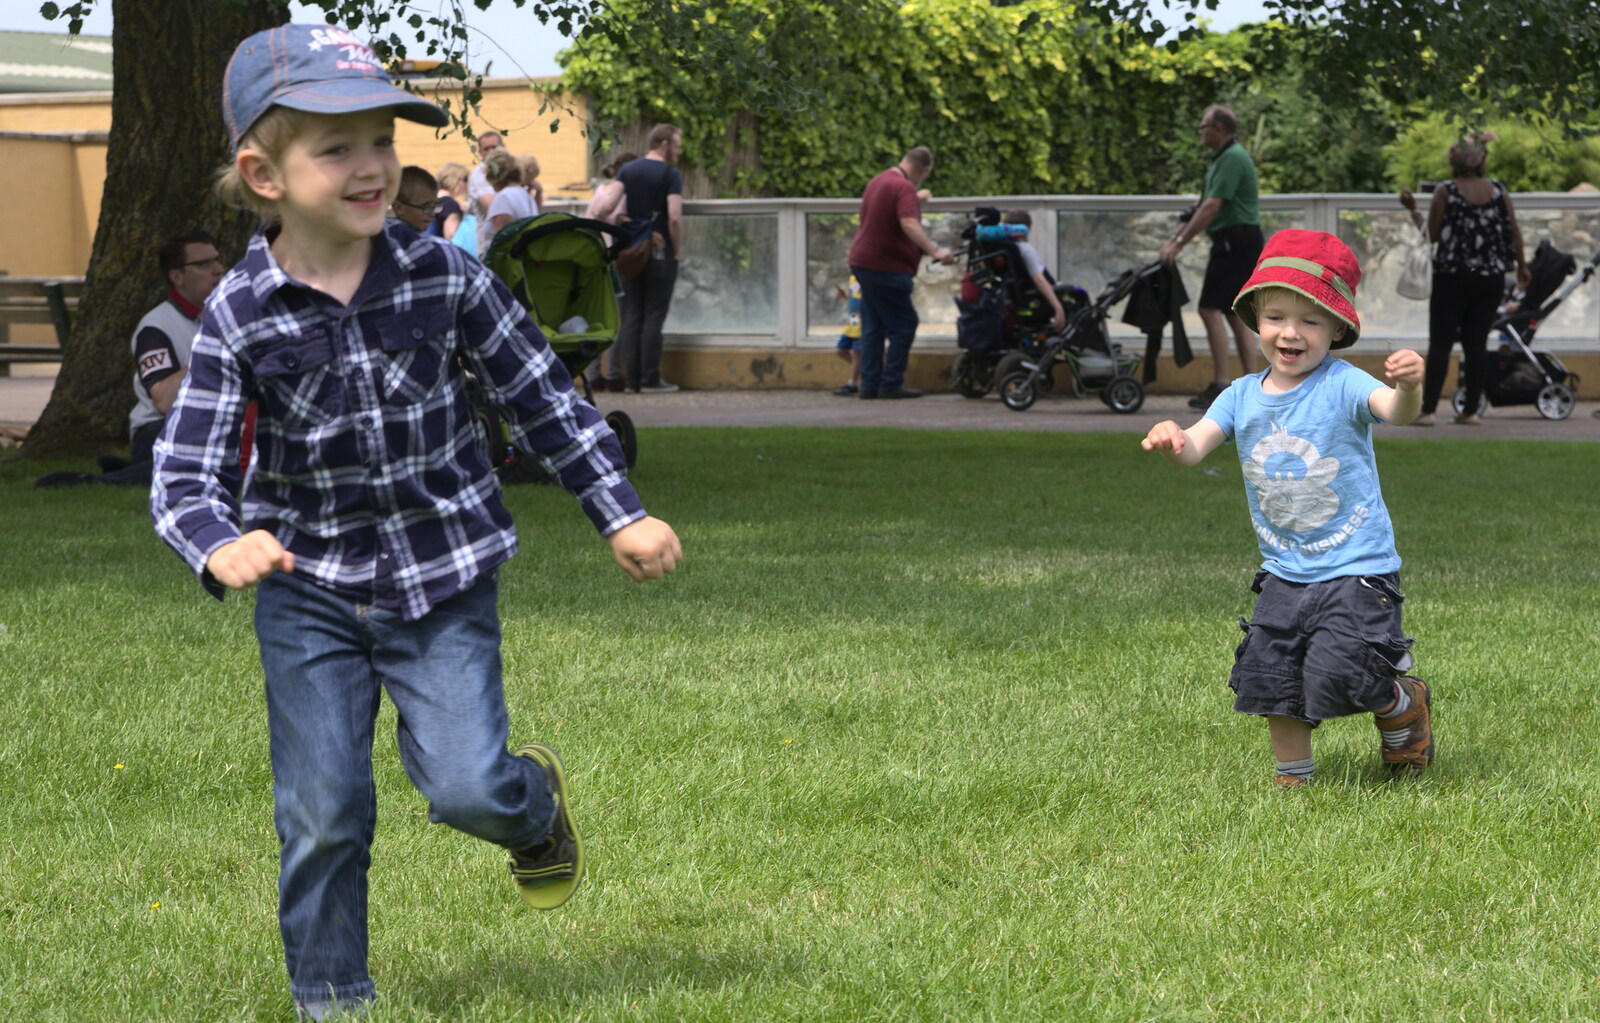 Fred and Harry run around from A Birthday Trip to the Zoo, Banham, Norfolk - 26th May 2014